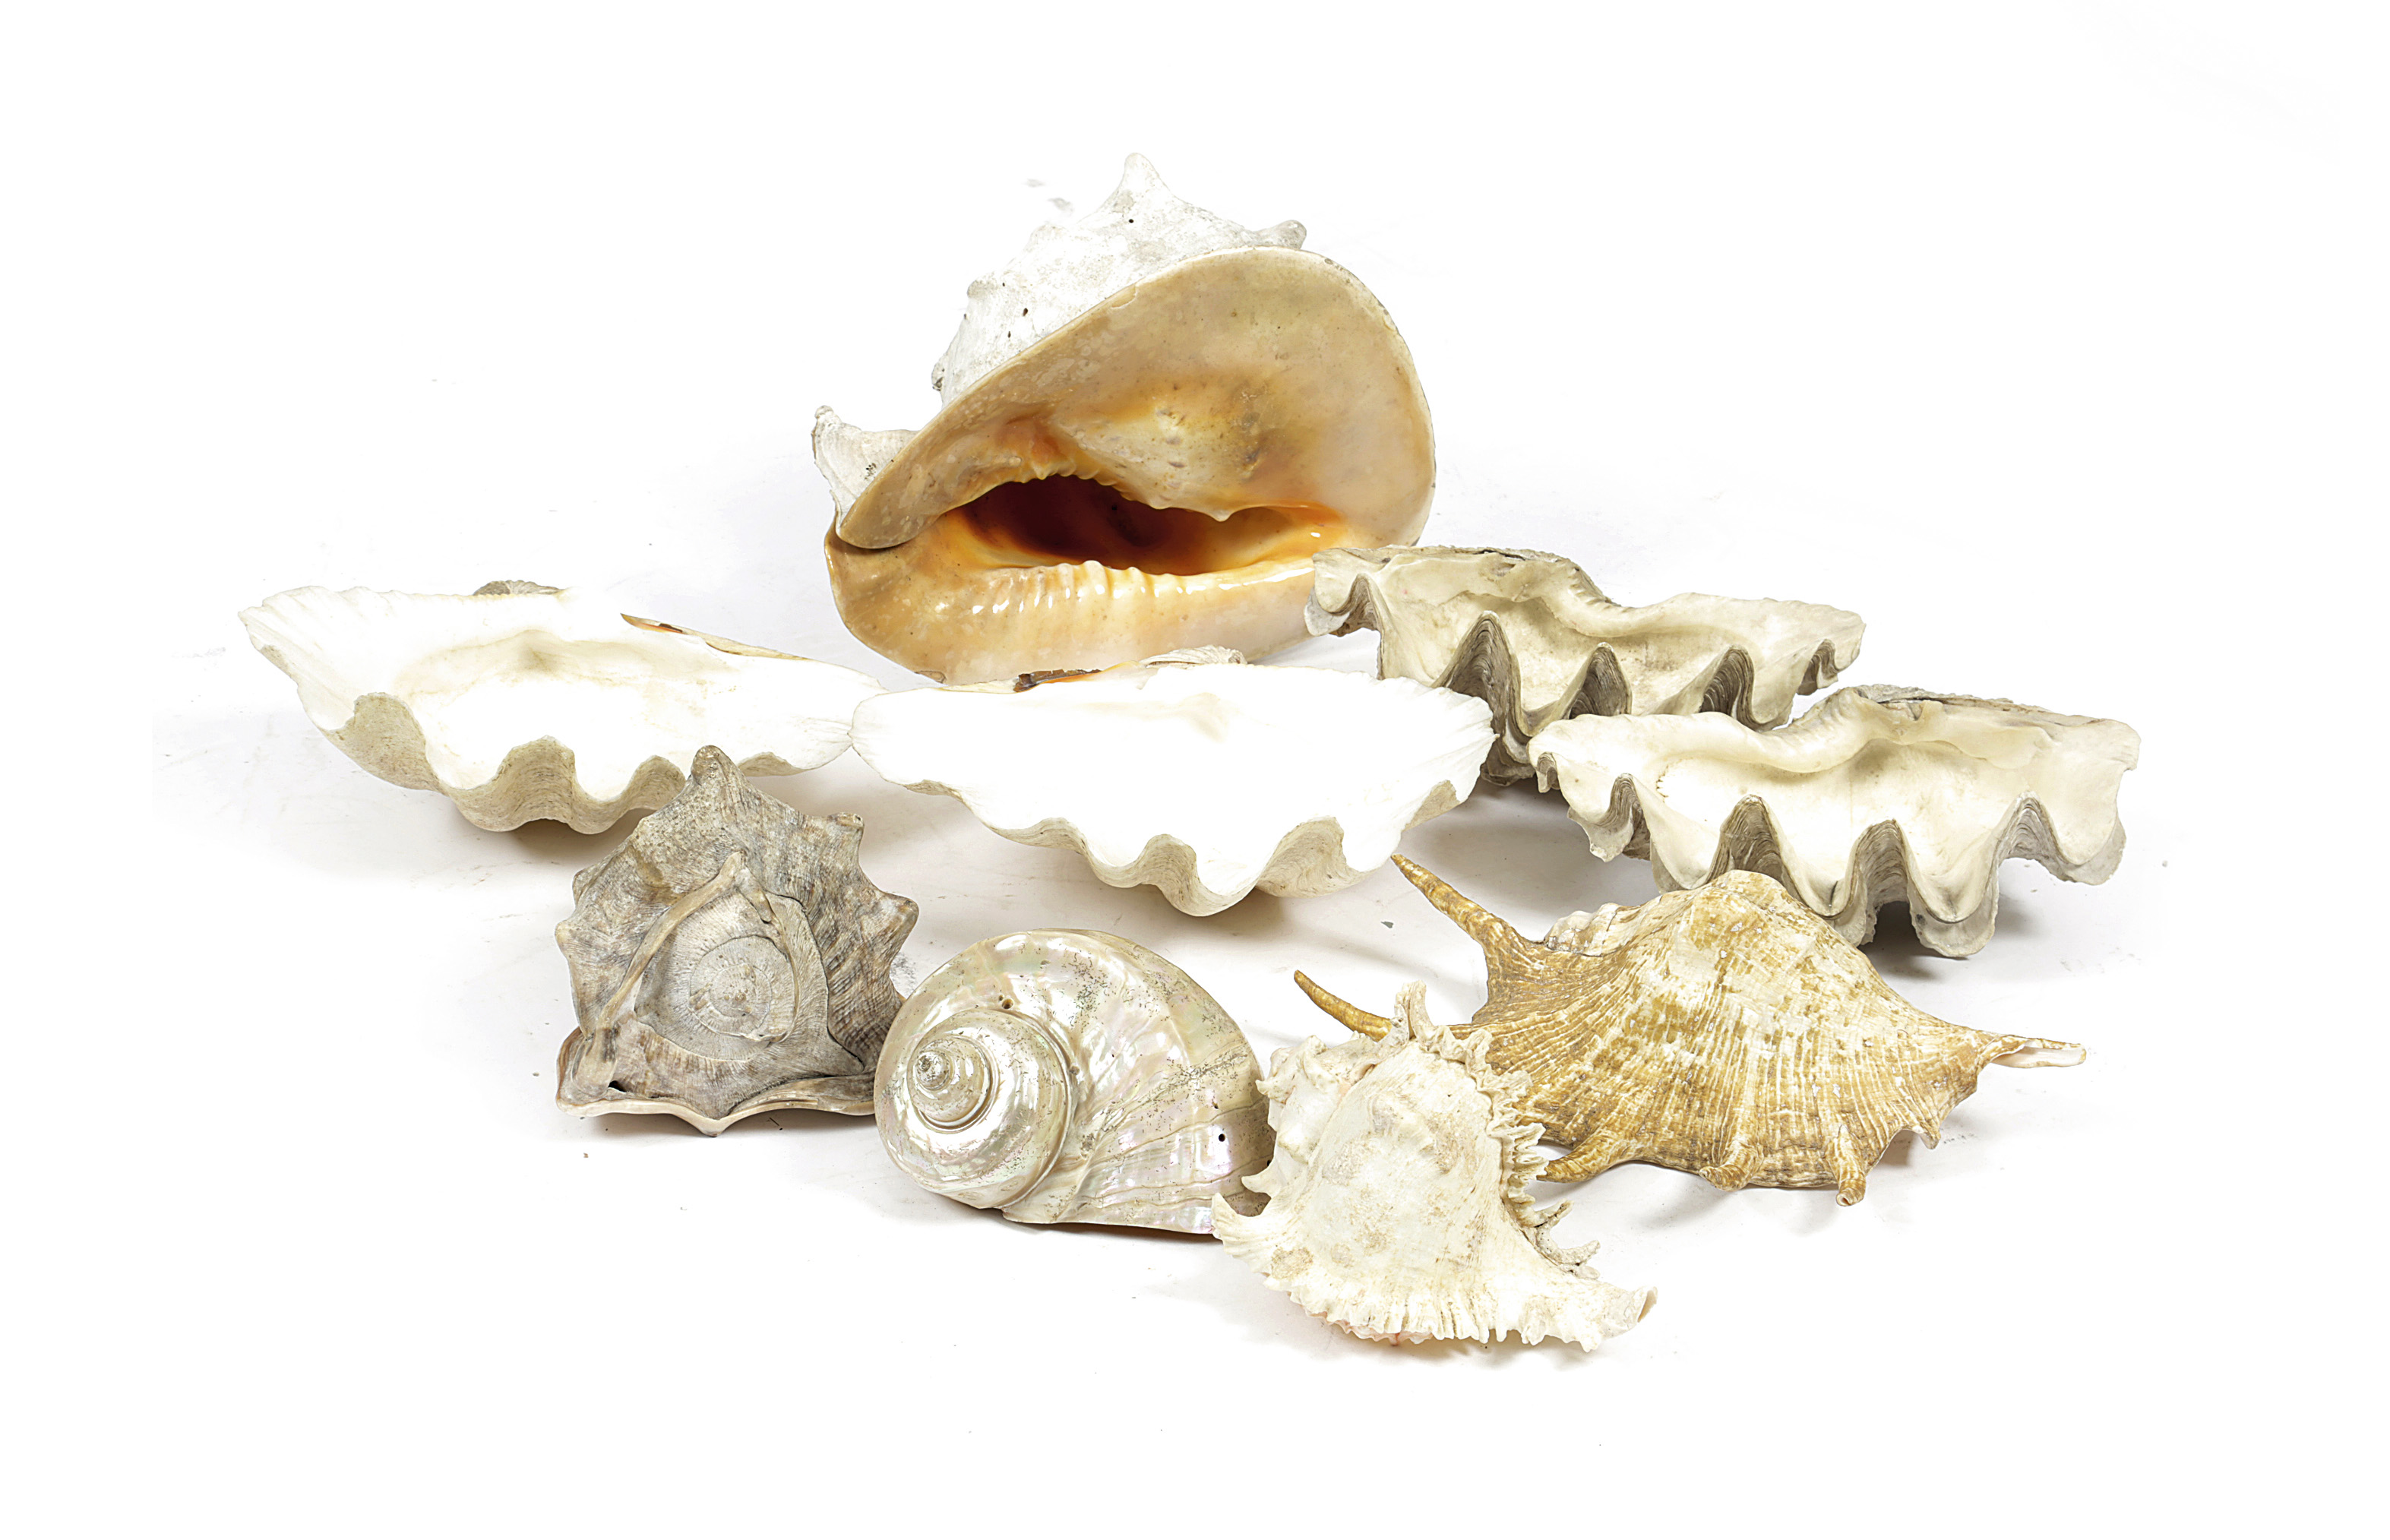 A COLLECTION OF LARGE SEASHELLS including: clam, conch and spider conch (9) 31cm (max)